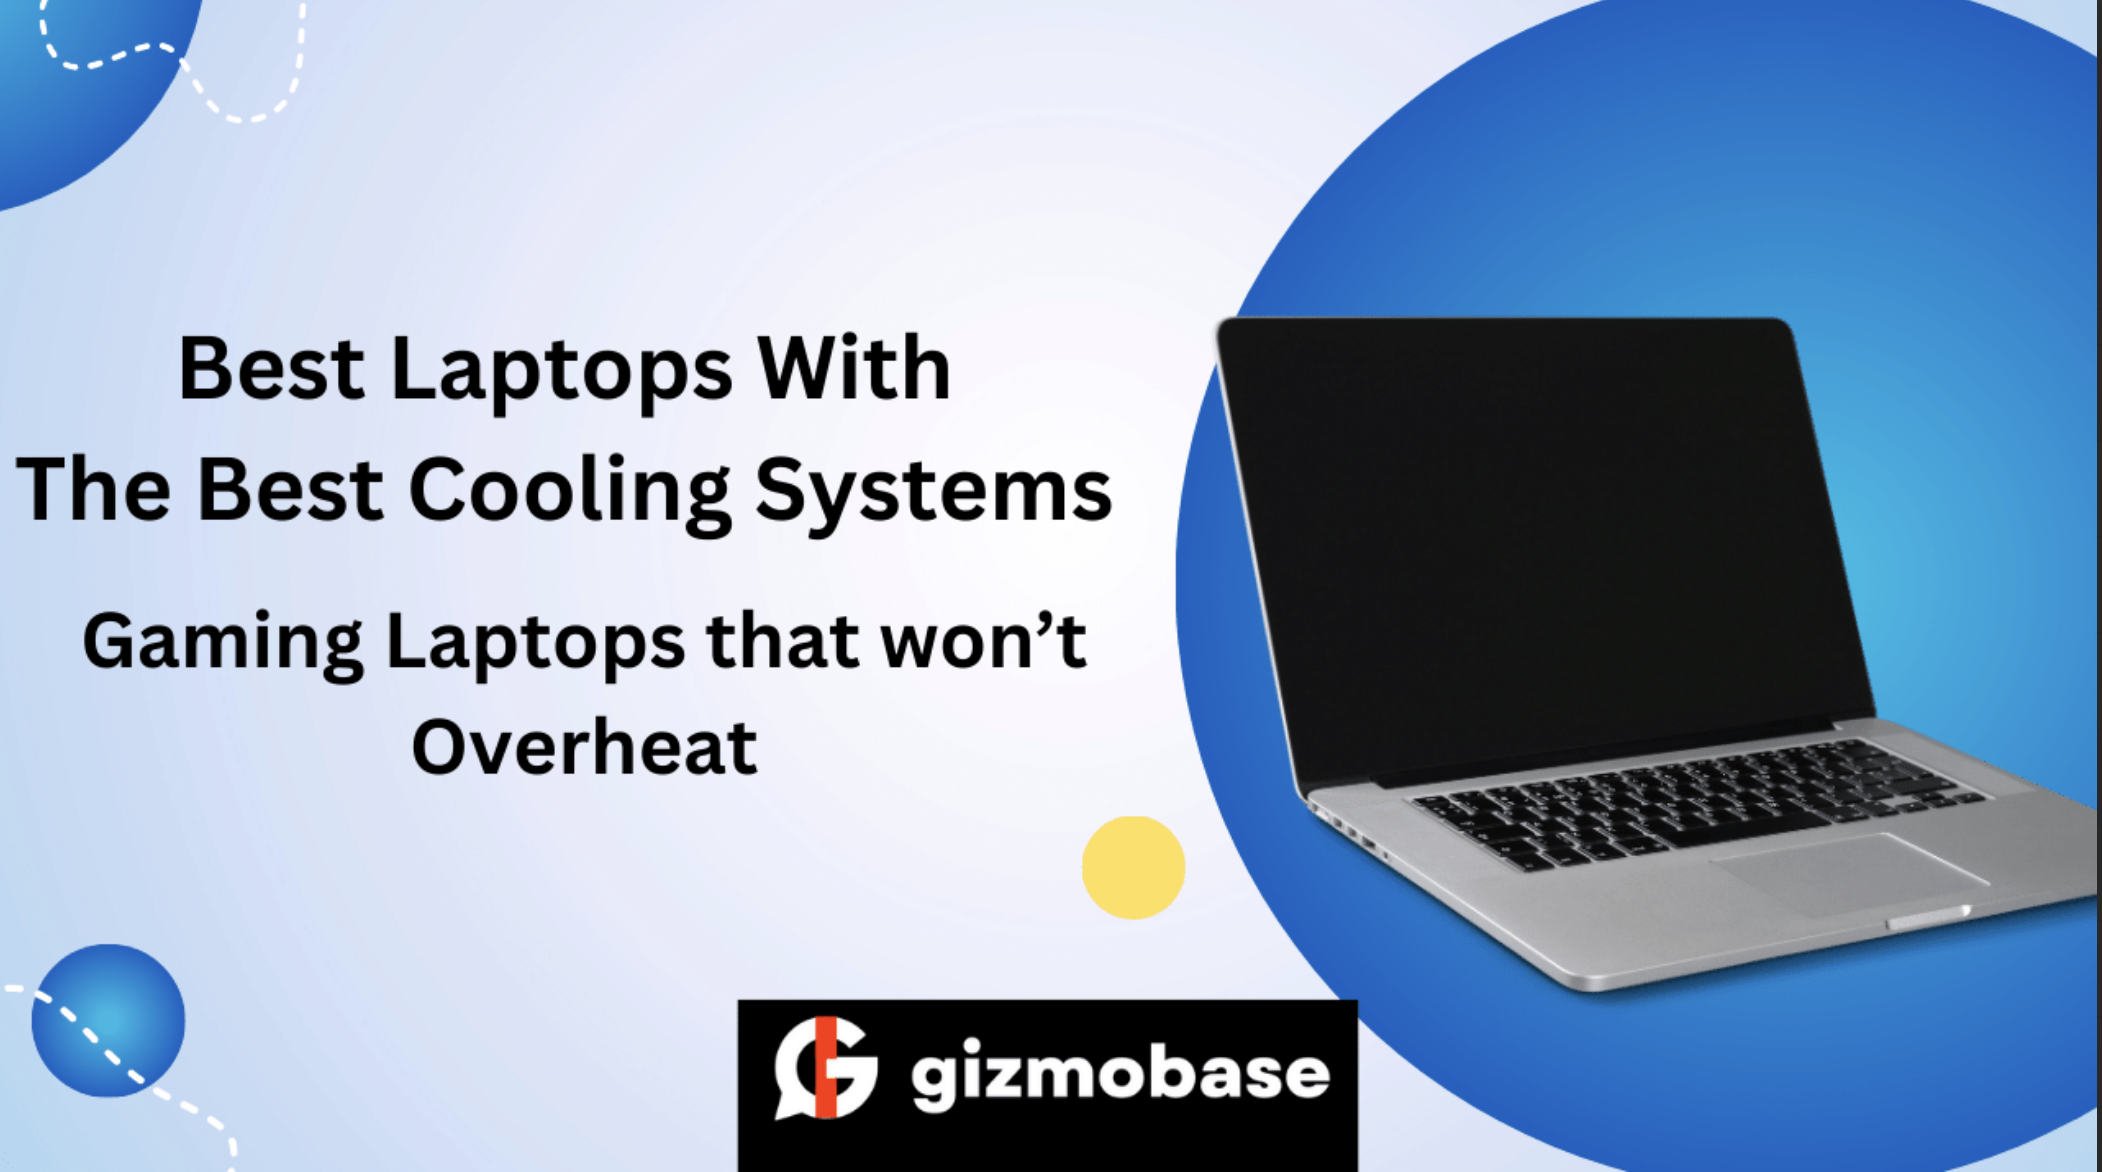 Best Laptops With The Best Cooling Systems